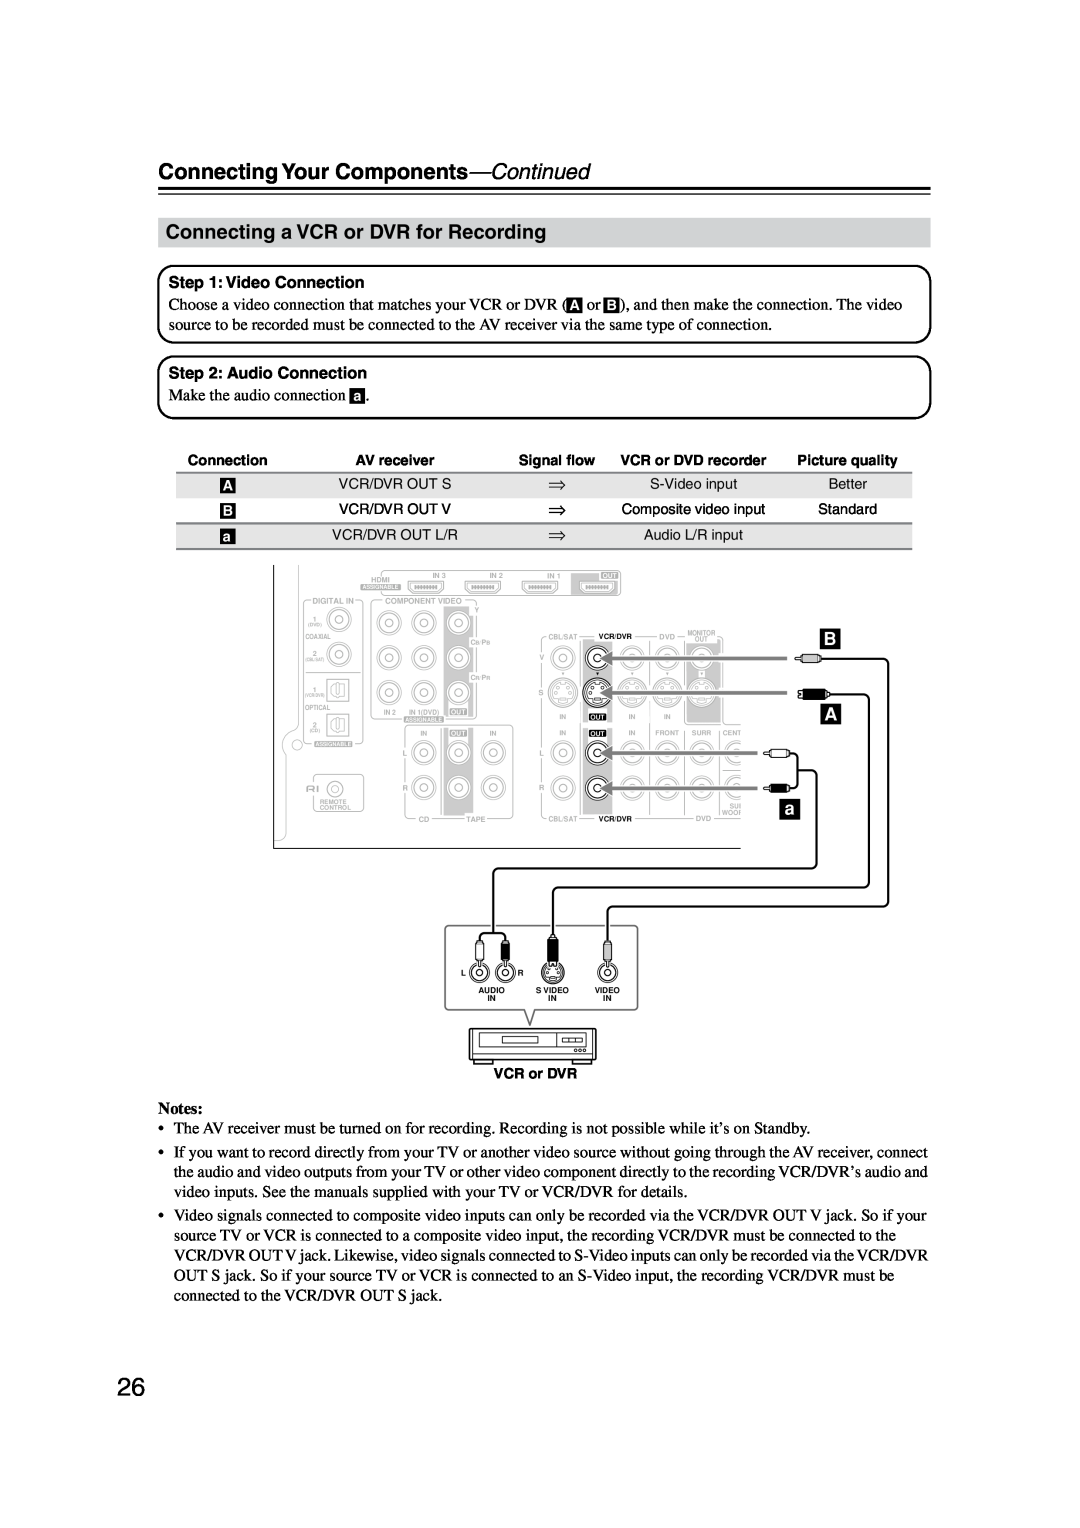 Onkyo TX-SR506, TX-SR576 instruction manual Connecting a VCR or DVR for Recording, Connecting Your Components—Continued 